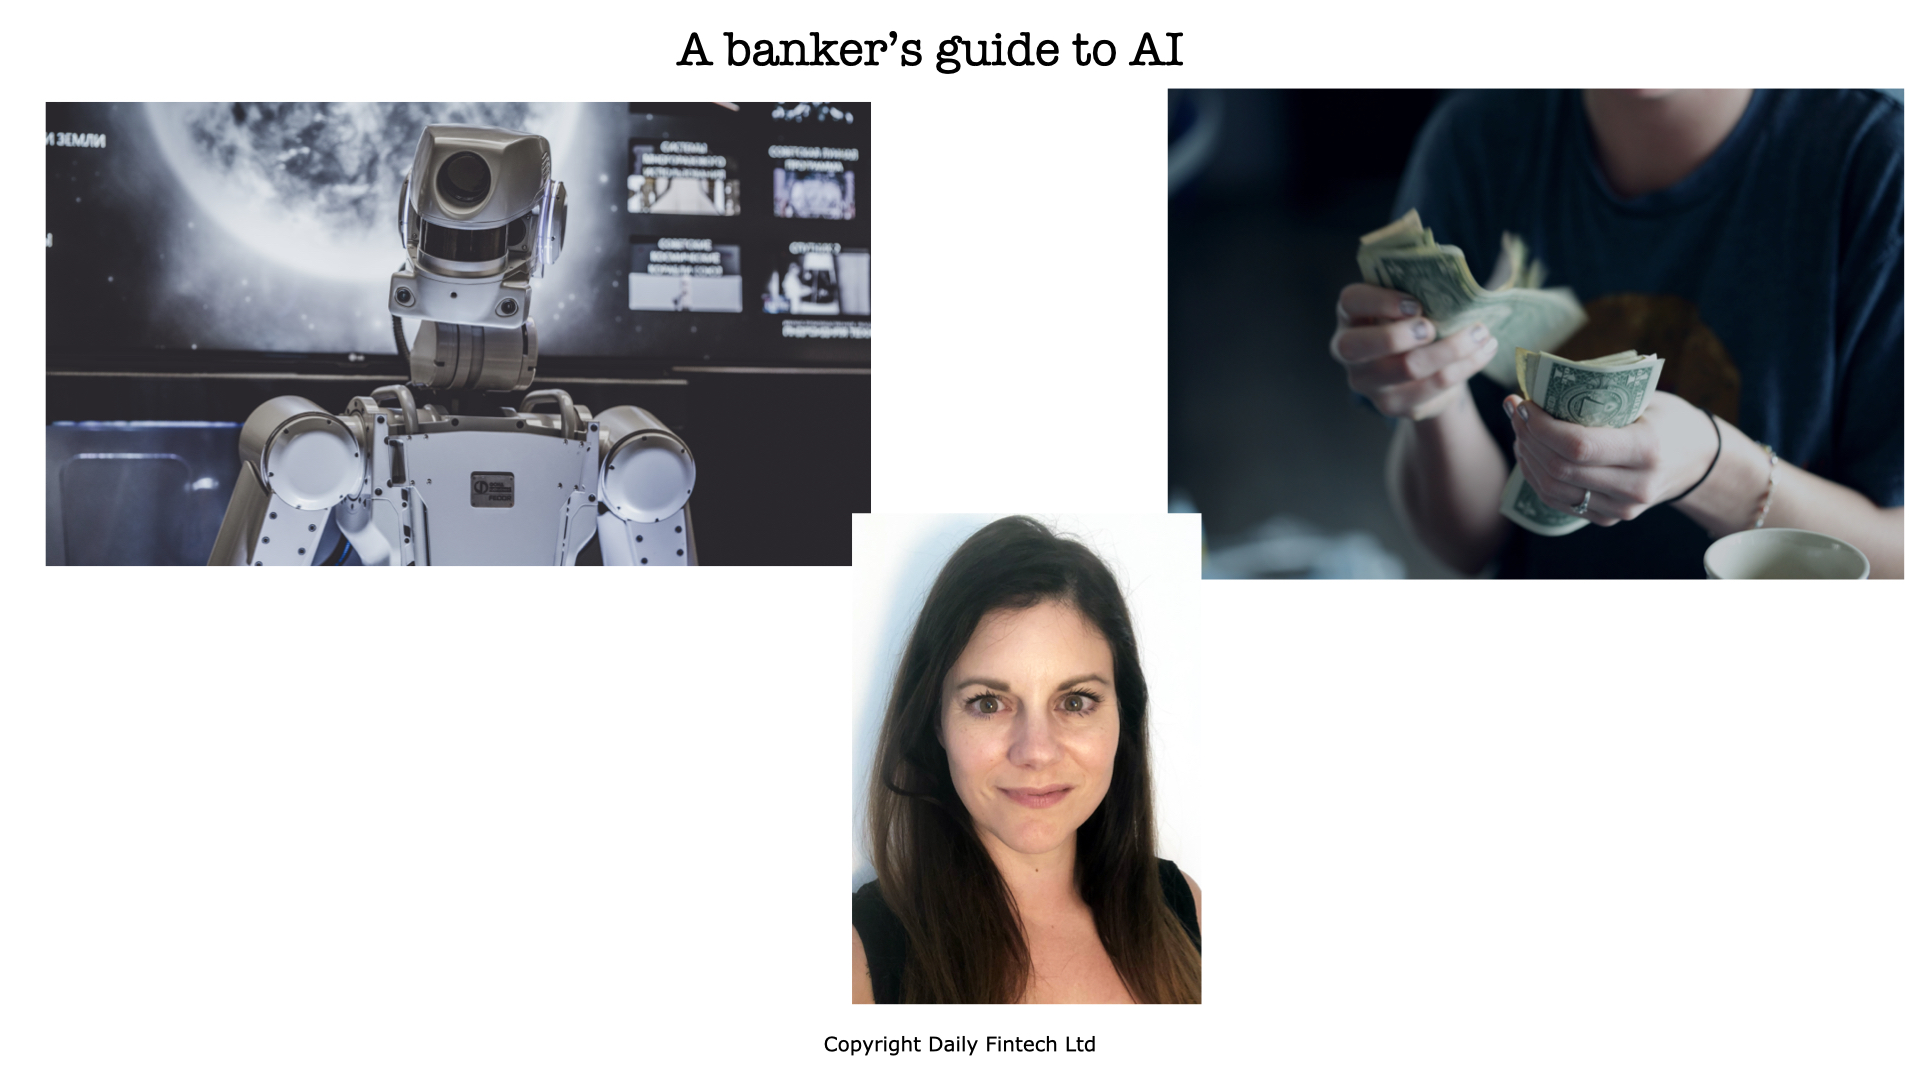 A bankers guide to AI Part 3. Does the AI have more than one purpose? What is the roadmap?